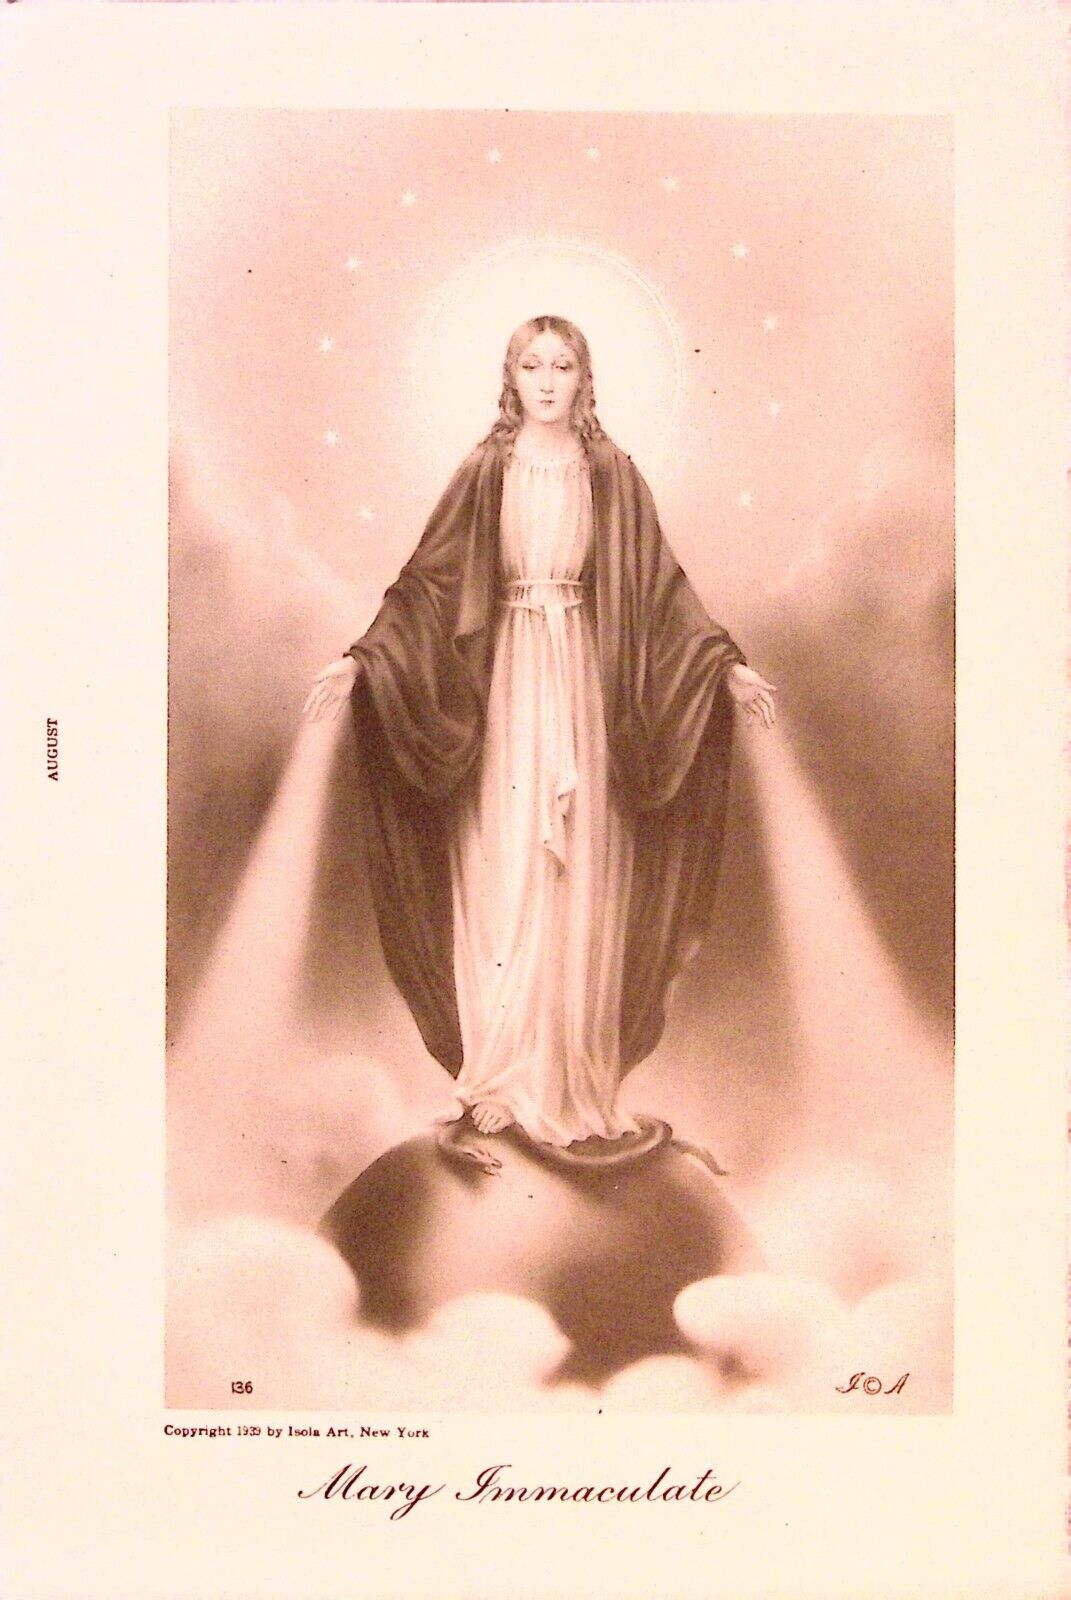 Mary Immaculate Religious Card Vintage 1939 Isola Art New York